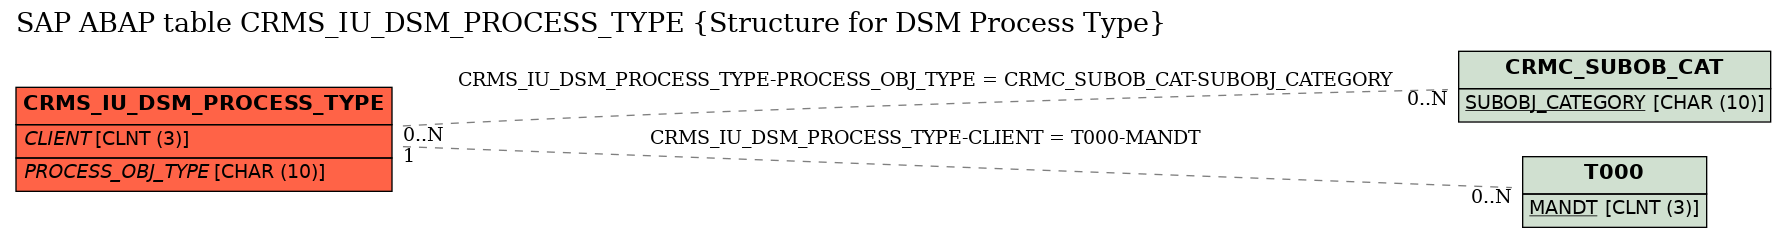 E-R Diagram for table CRMS_IU_DSM_PROCESS_TYPE (Structure for DSM Process Type)